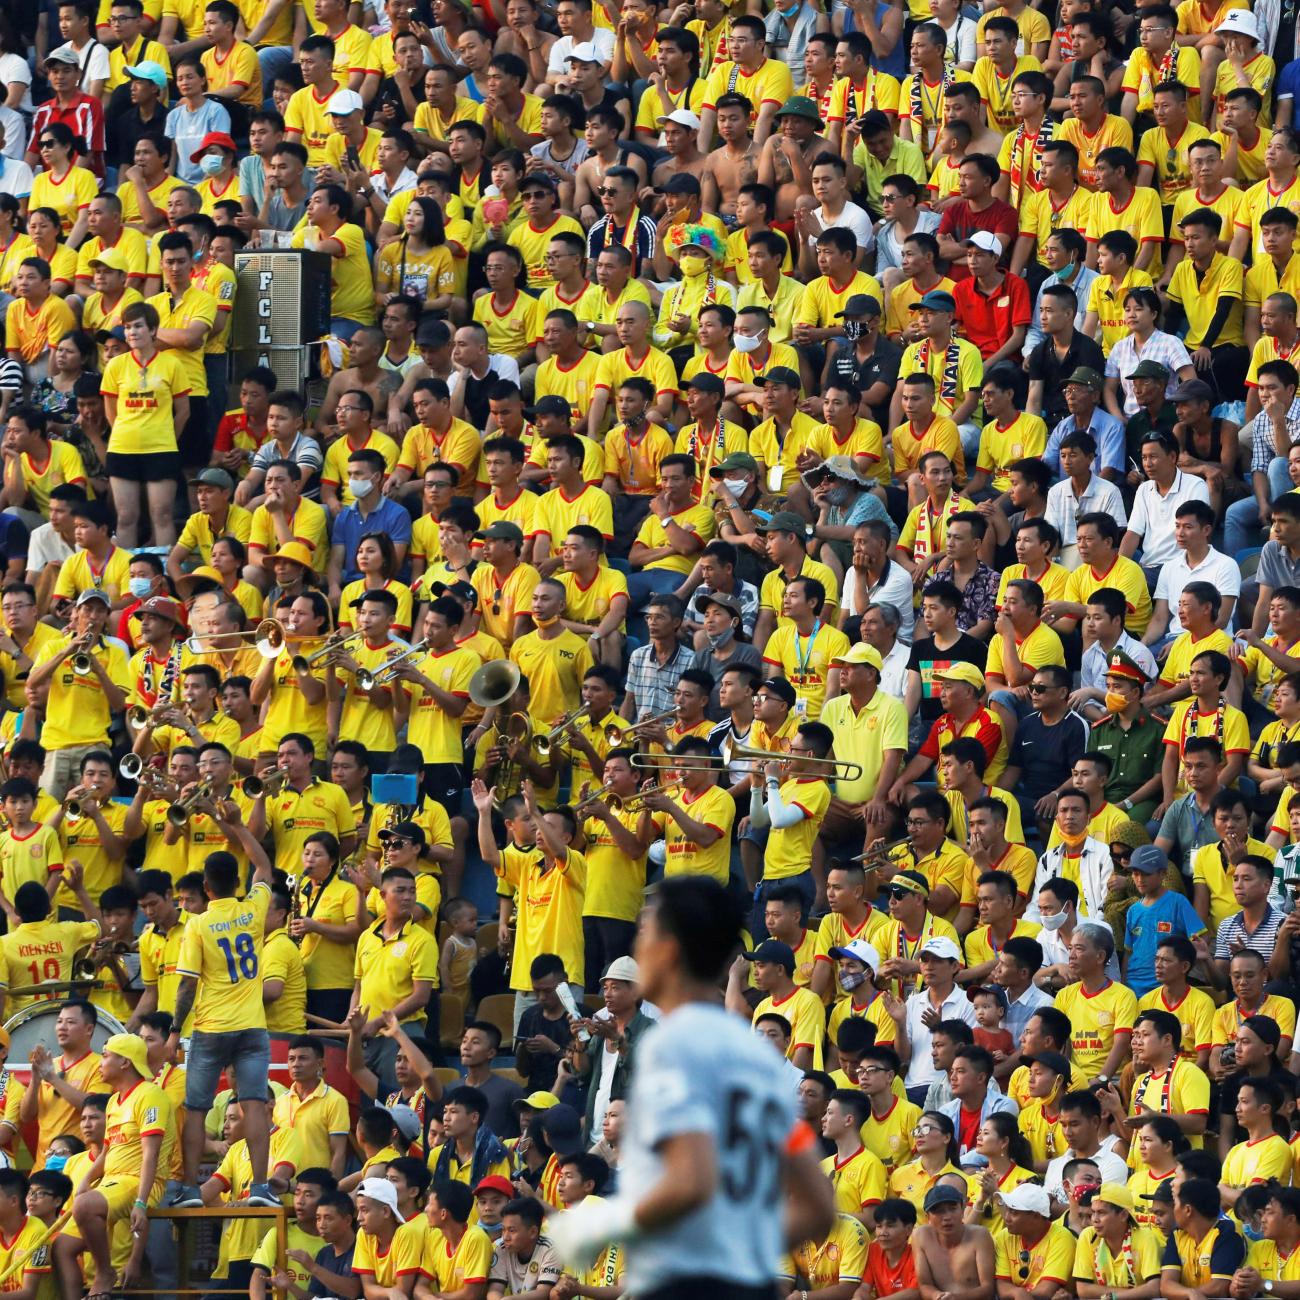 Soccer fans attend a match between Viettel and Duoc Nam Ha Nam Dinh of Vietnam's national soccer league after an outbreak and nationwide COVID-19 lockdown, in Nam Dinh province, Vietnam, on June 5, 2020.